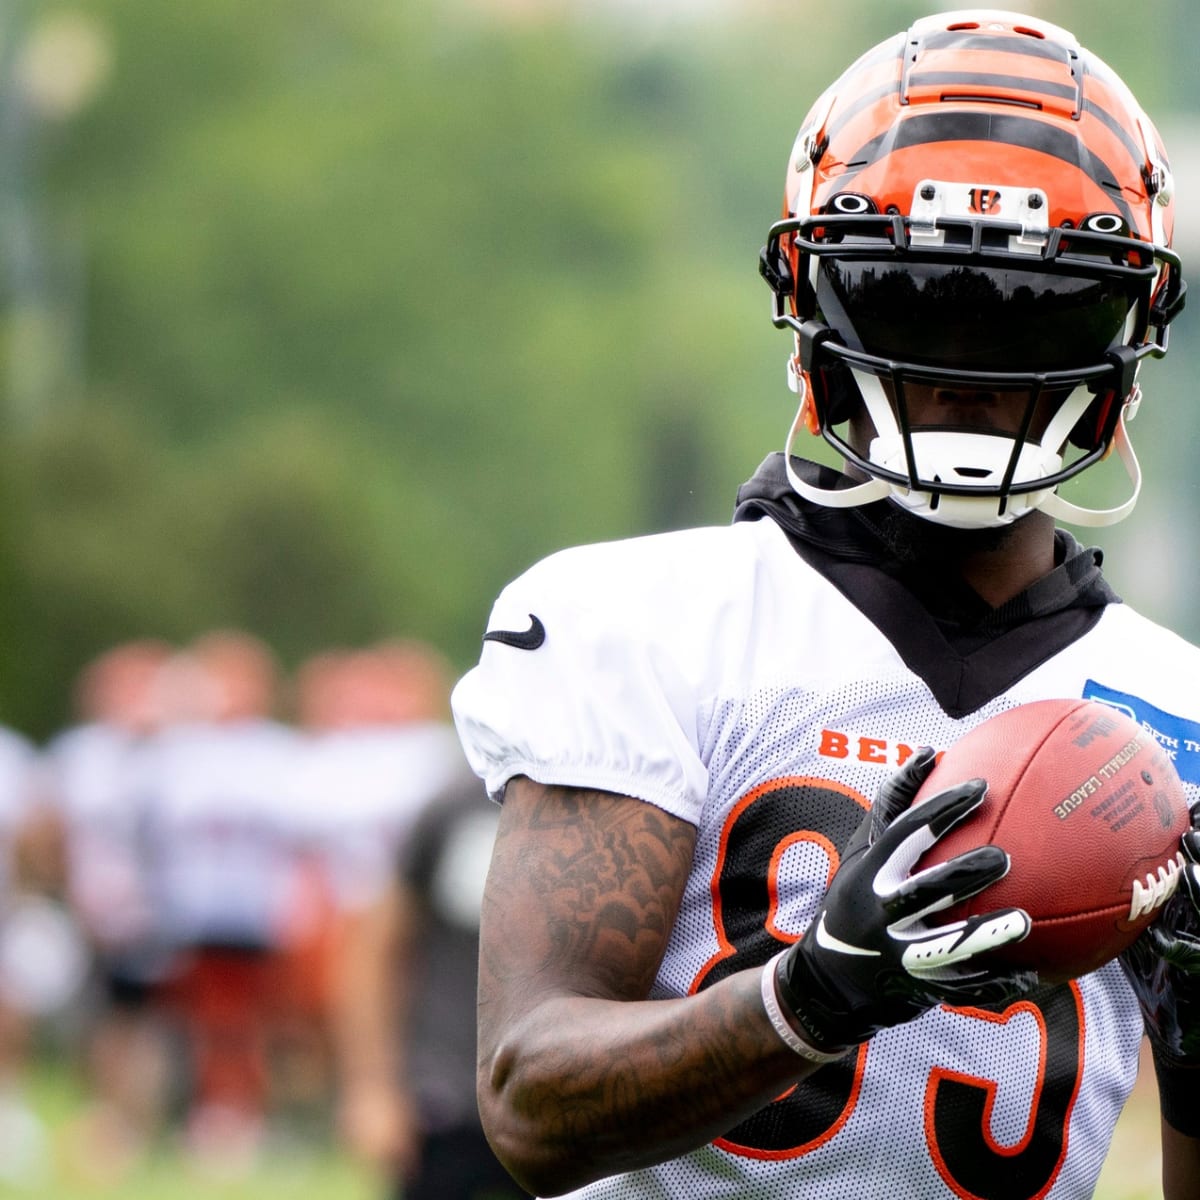 Tee Higgins is thrilled to join his idol, A.J. Green